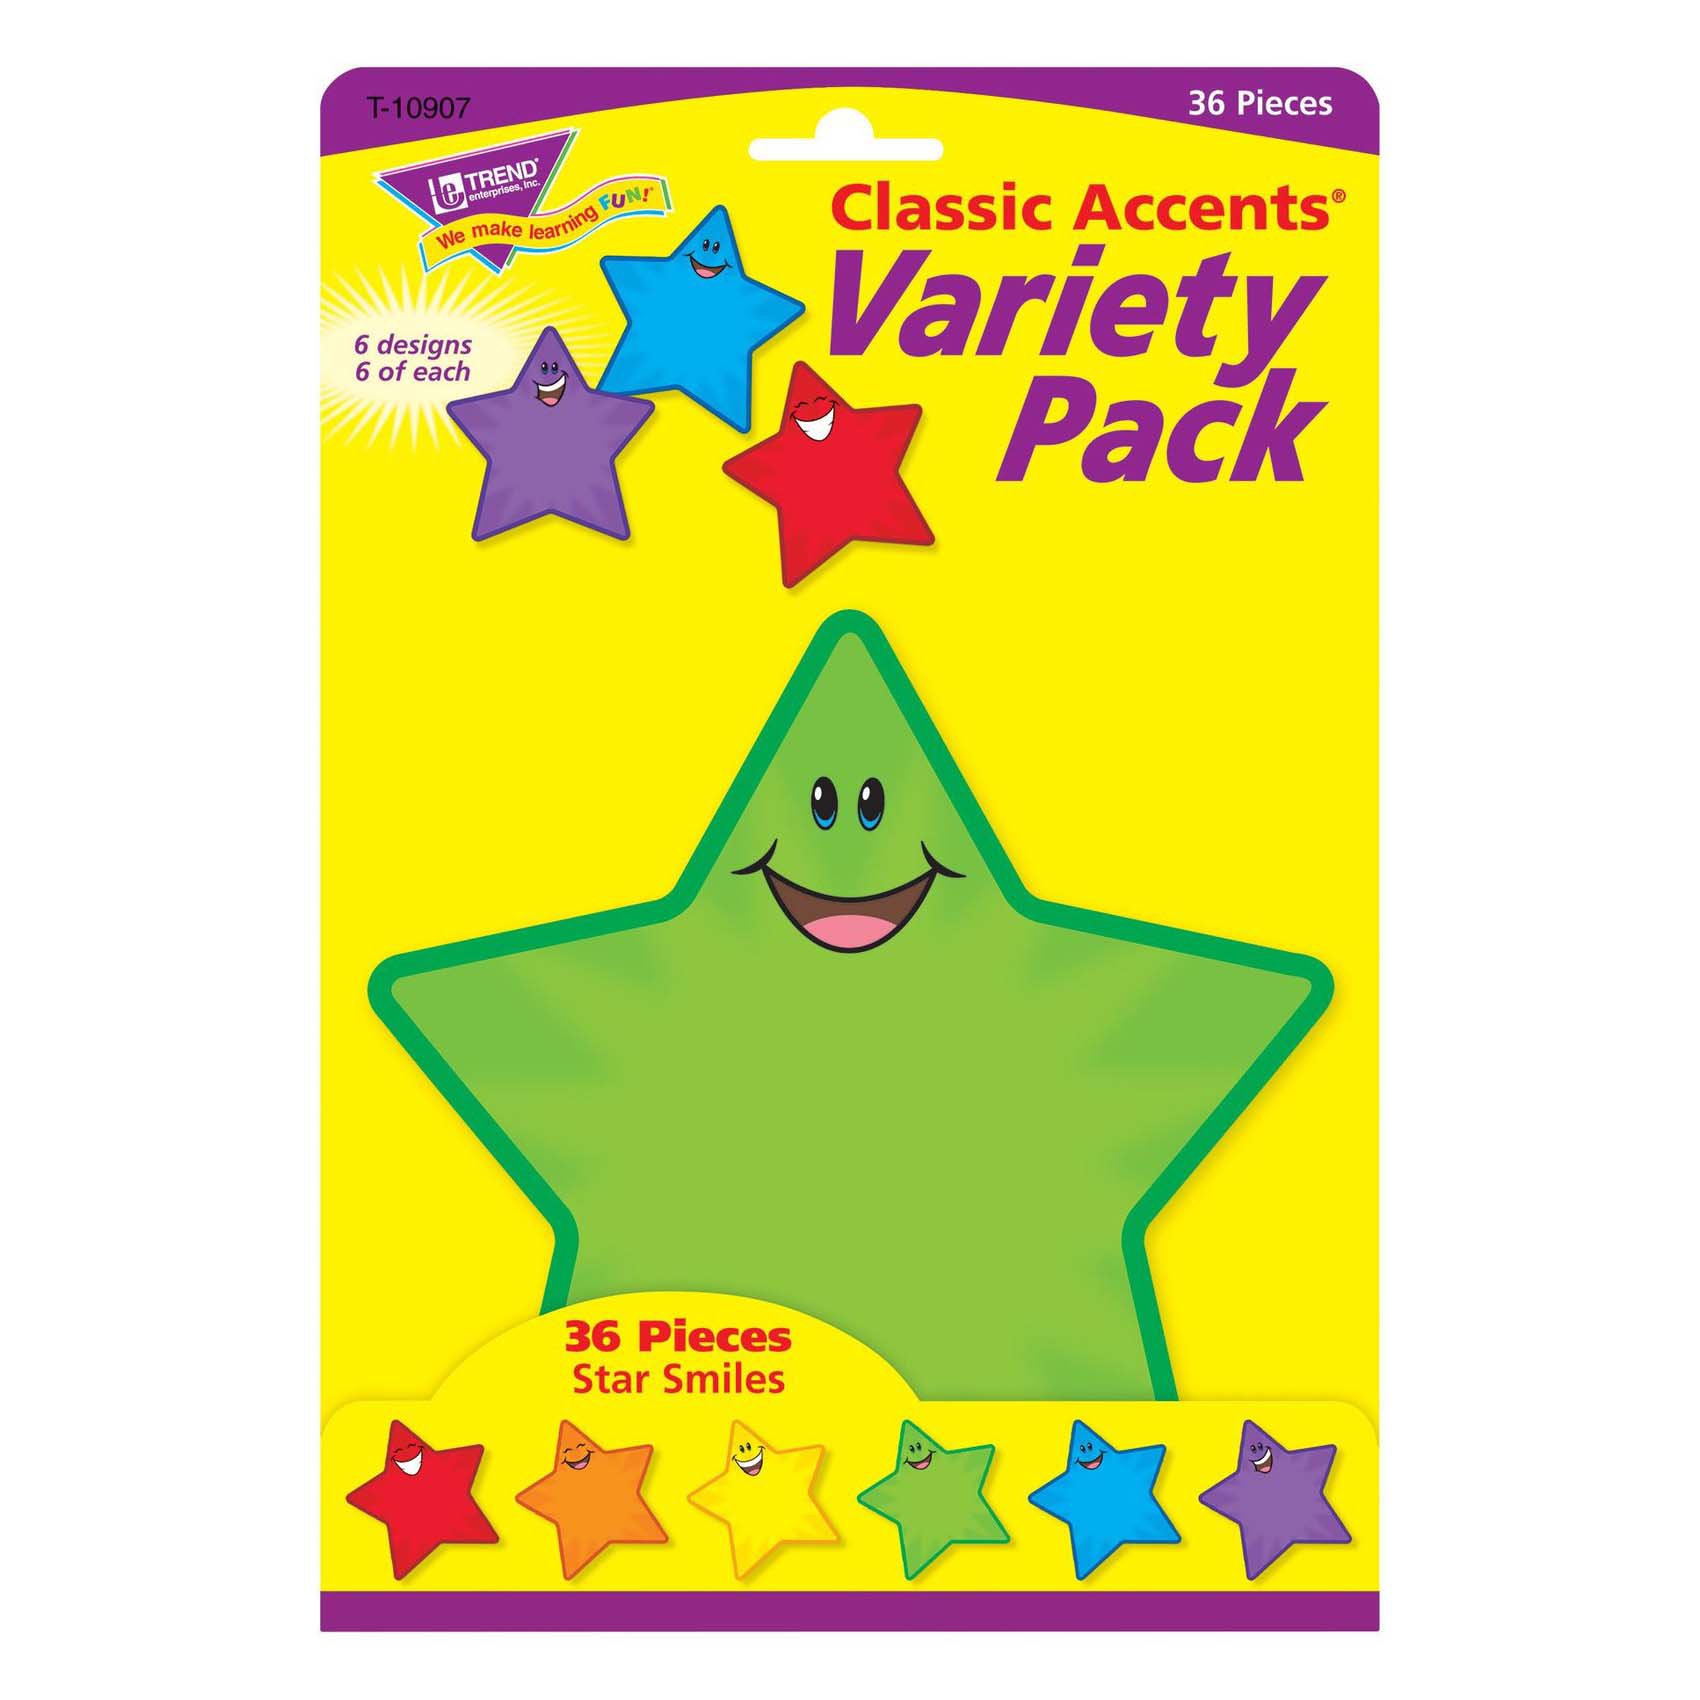 T-10907 Star Smiles Classic Accents® Variety Pack Trend Enterprises Inc 